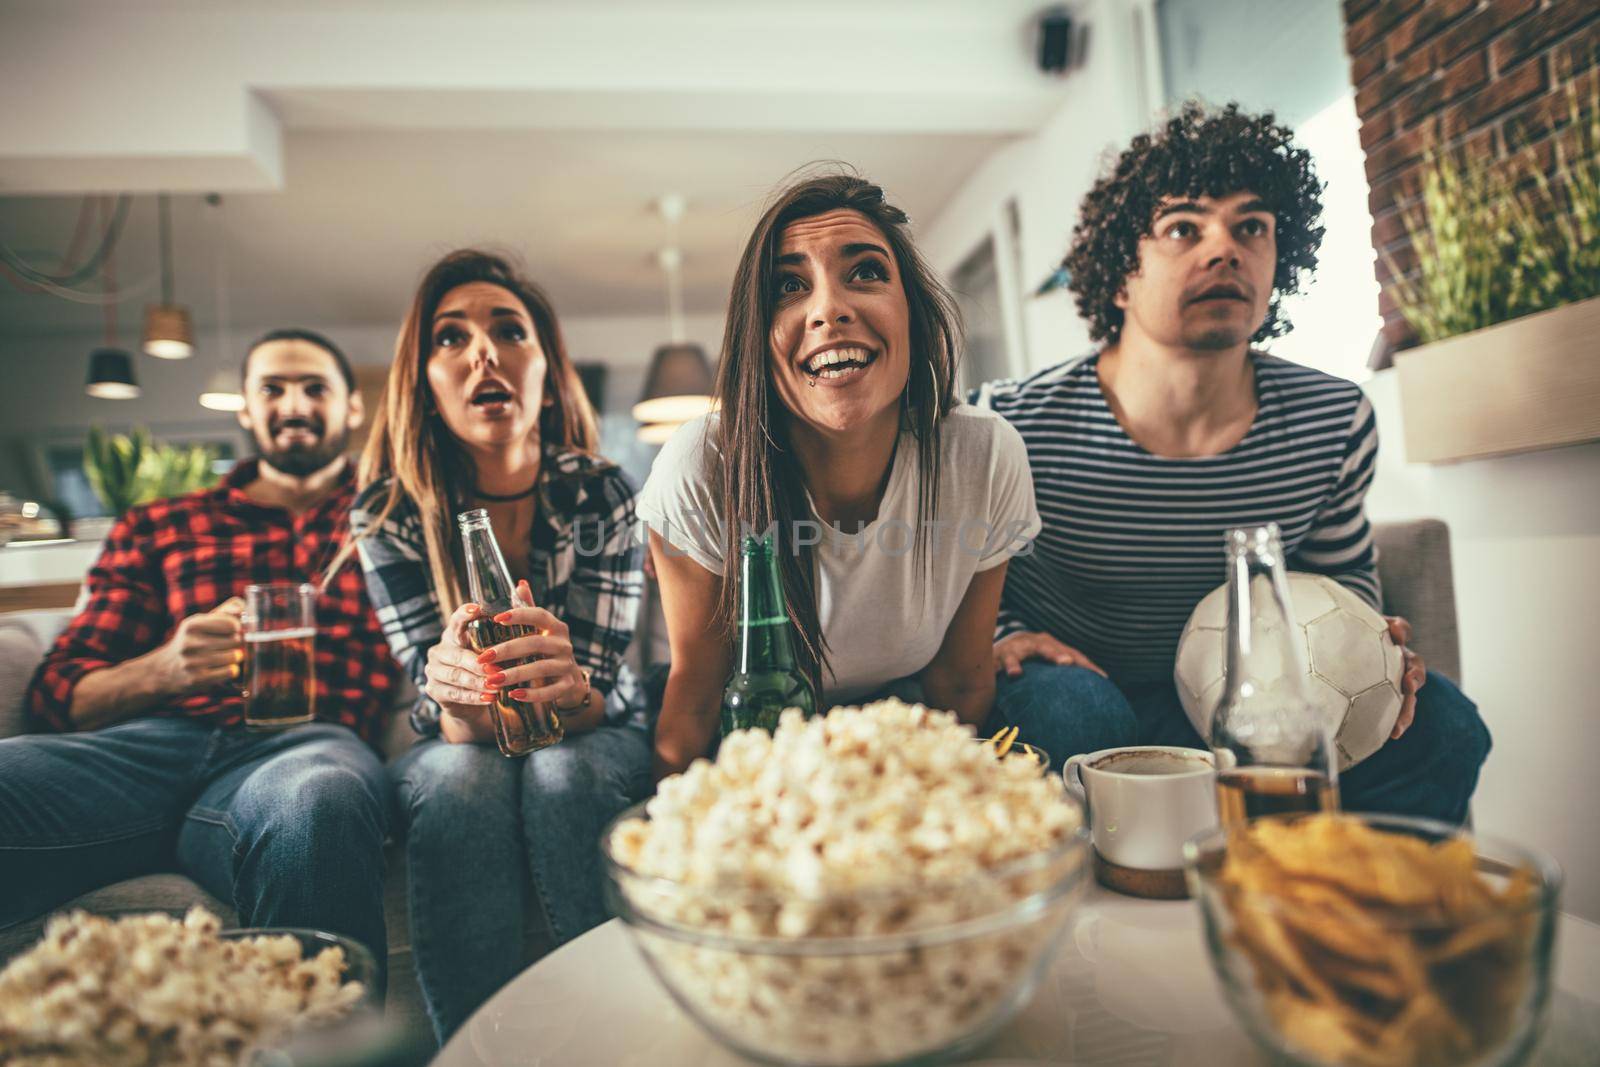 Friends are fans of sports games as football love spending their free time at home together. They are screaming and gesturing for a victory. 